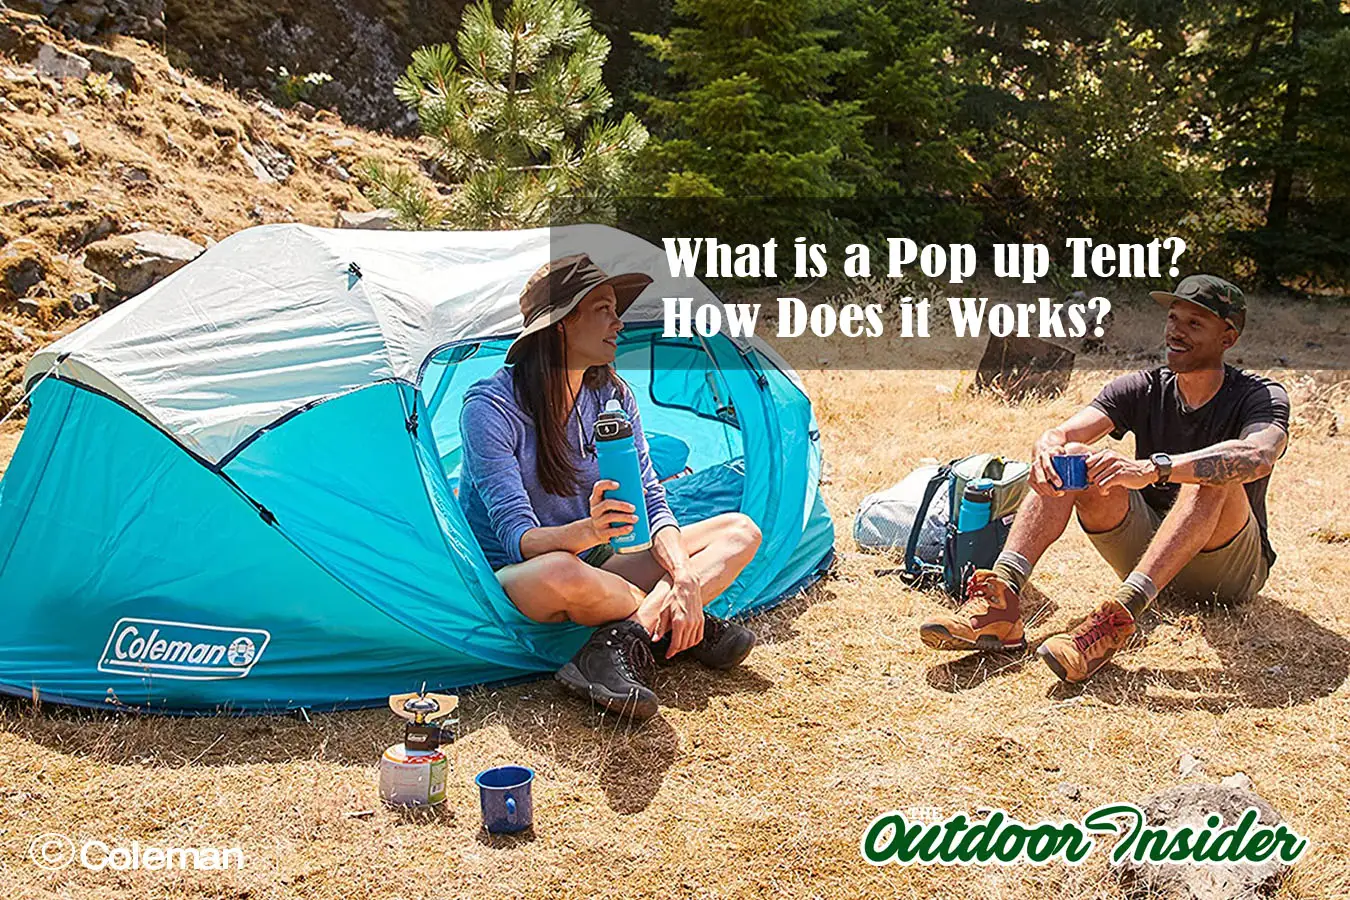 What is a Pop up Tent and How Does it Works? Find out Answer